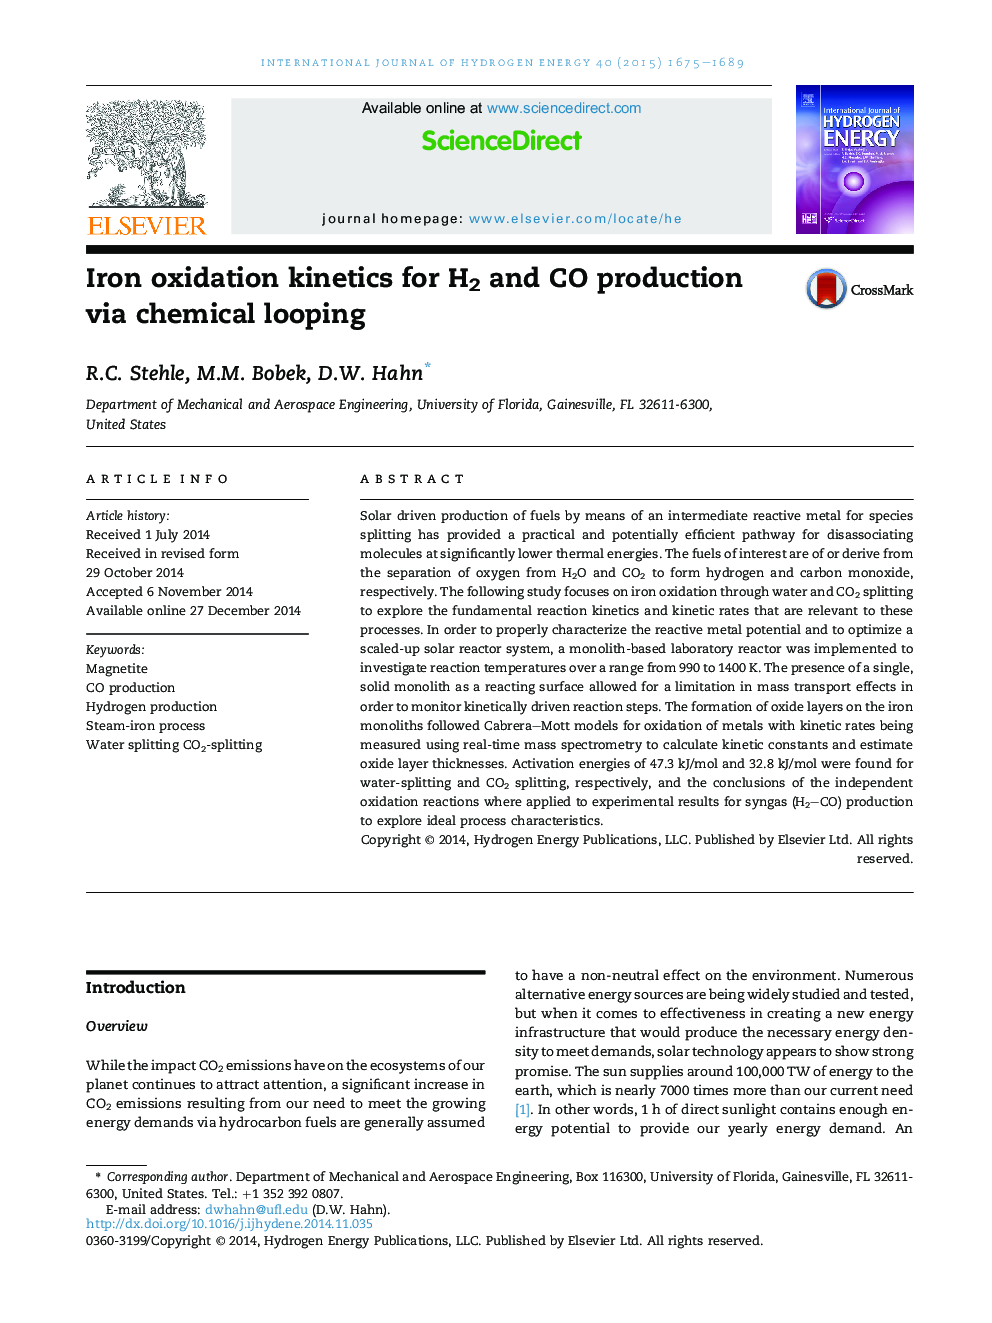 Iron oxidation kinetics for H2 and CO production via chemical looping